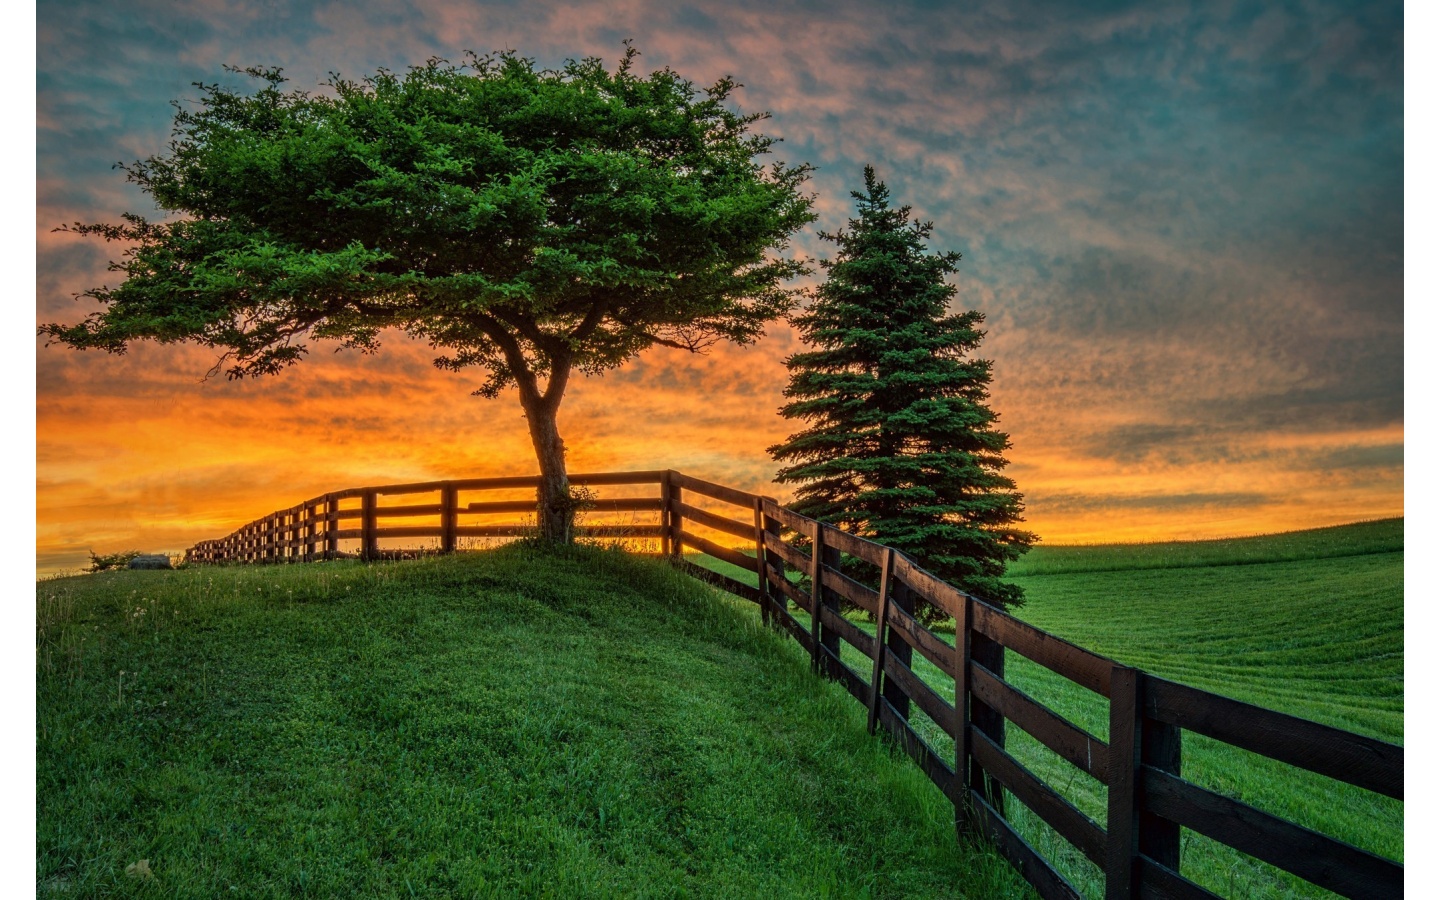 Trees And Fence At Sunset